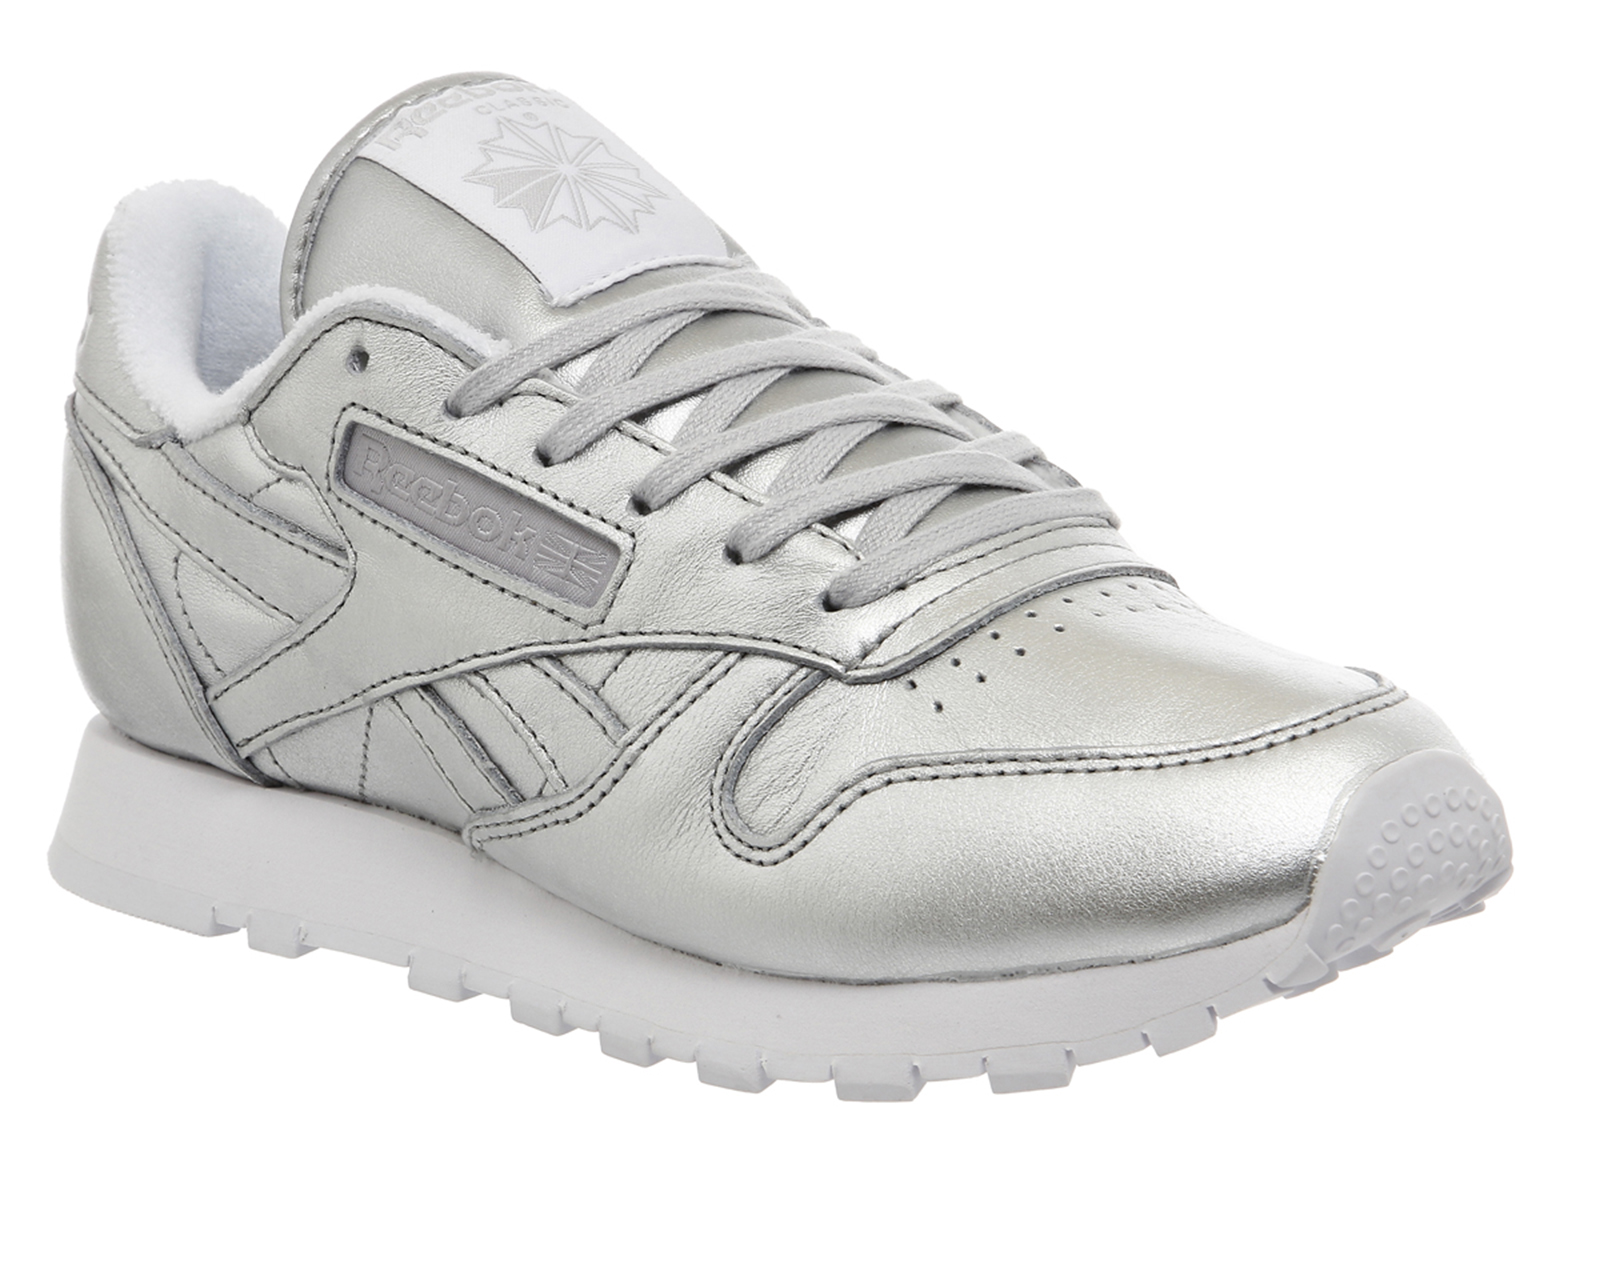 Reebok Classic Leather Trainers Presence Silver Face - junior